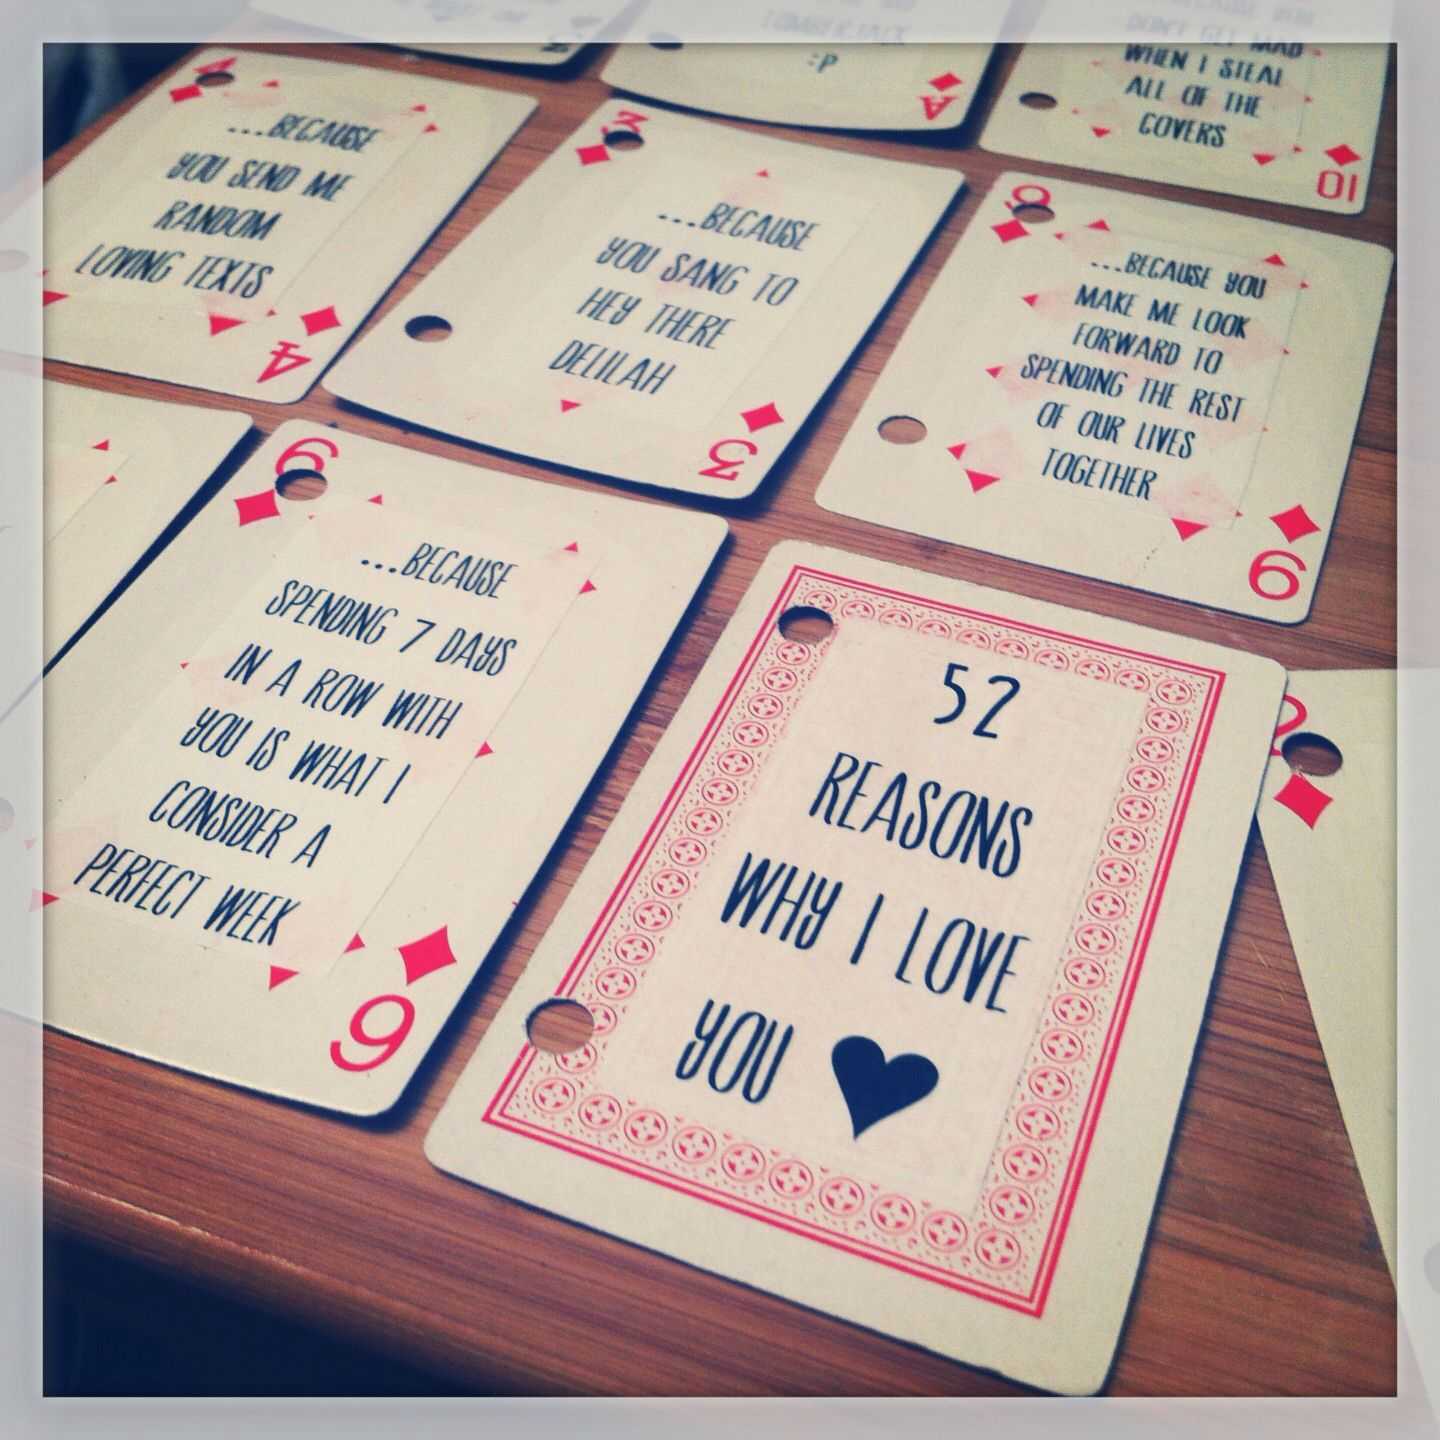 Pin On Gifts & Wrapping. Intended For 52 Things I Love About You Deck Of Cards Template